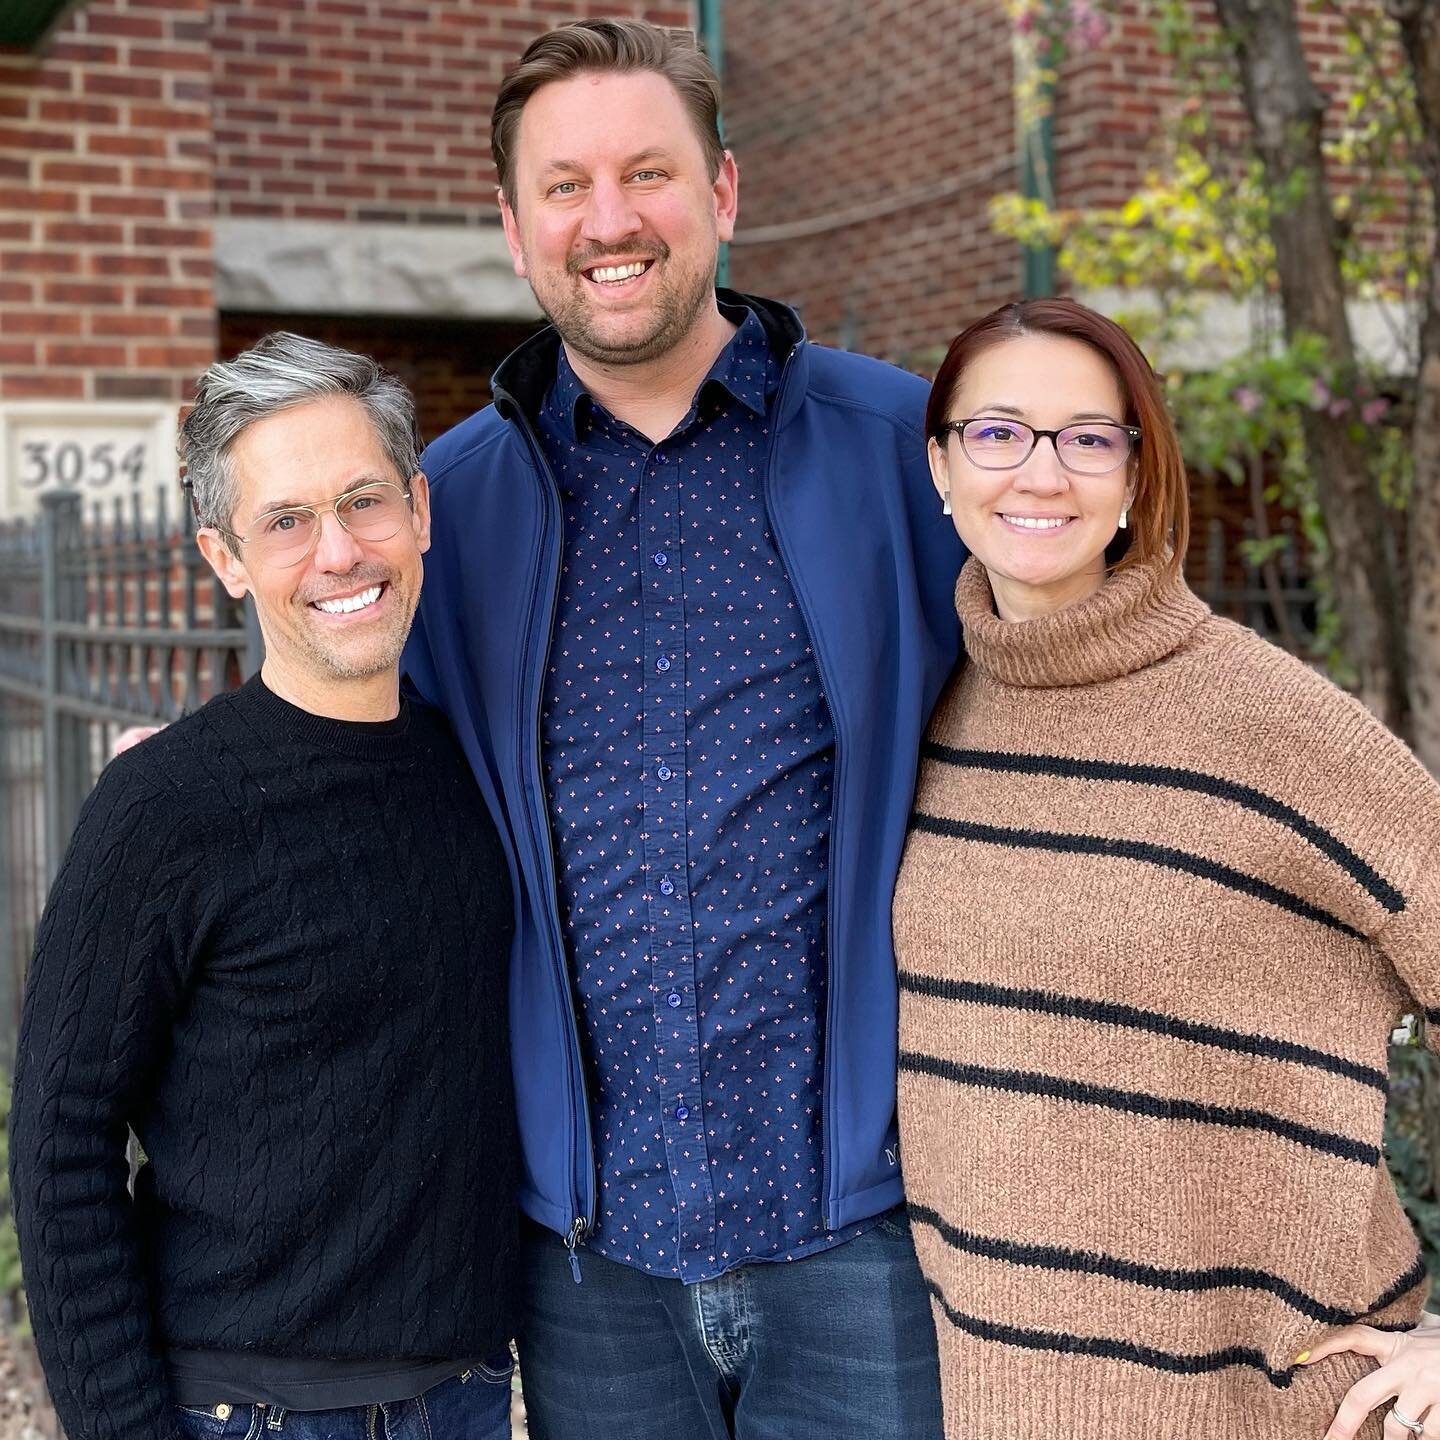 So pleased to help this incredibly wonderful and special couple find an incredibly wonderful and special home in gorgeous Lakeview!!! 

Not to toot my own horn (HONK) but we *did* negotiate a pretty good deal - which, if you&rsquo;re paying attention